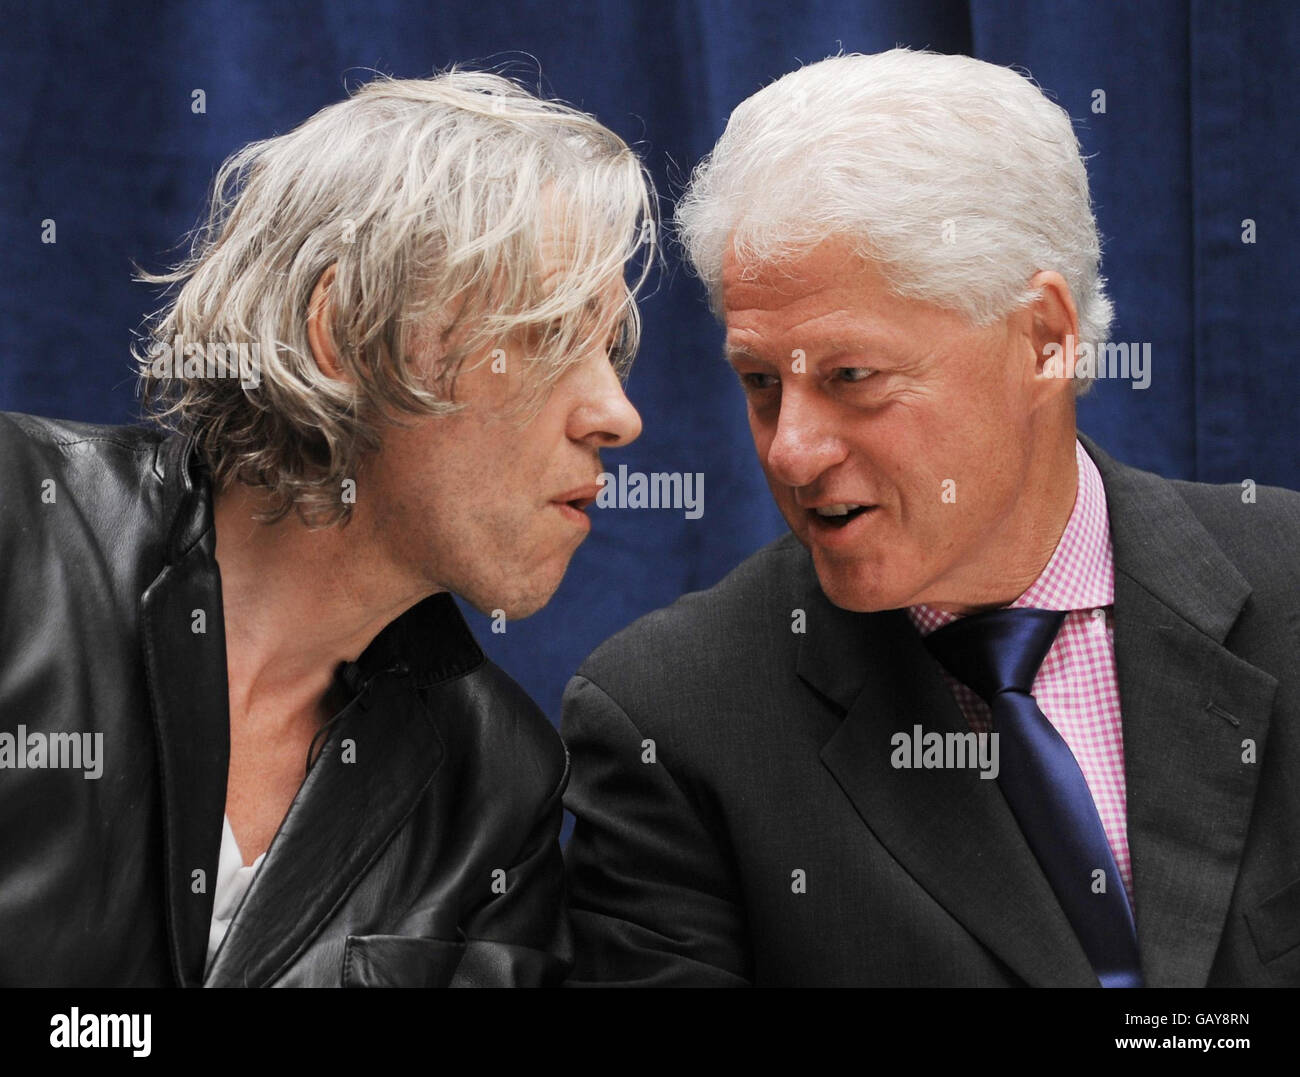 President Bill Clinton shares a platform with Sir Bob Geldof at the Department for International Development in London today where they announced a new partnership to end rural poverty in Rwanda and Malawi. Stock Photo